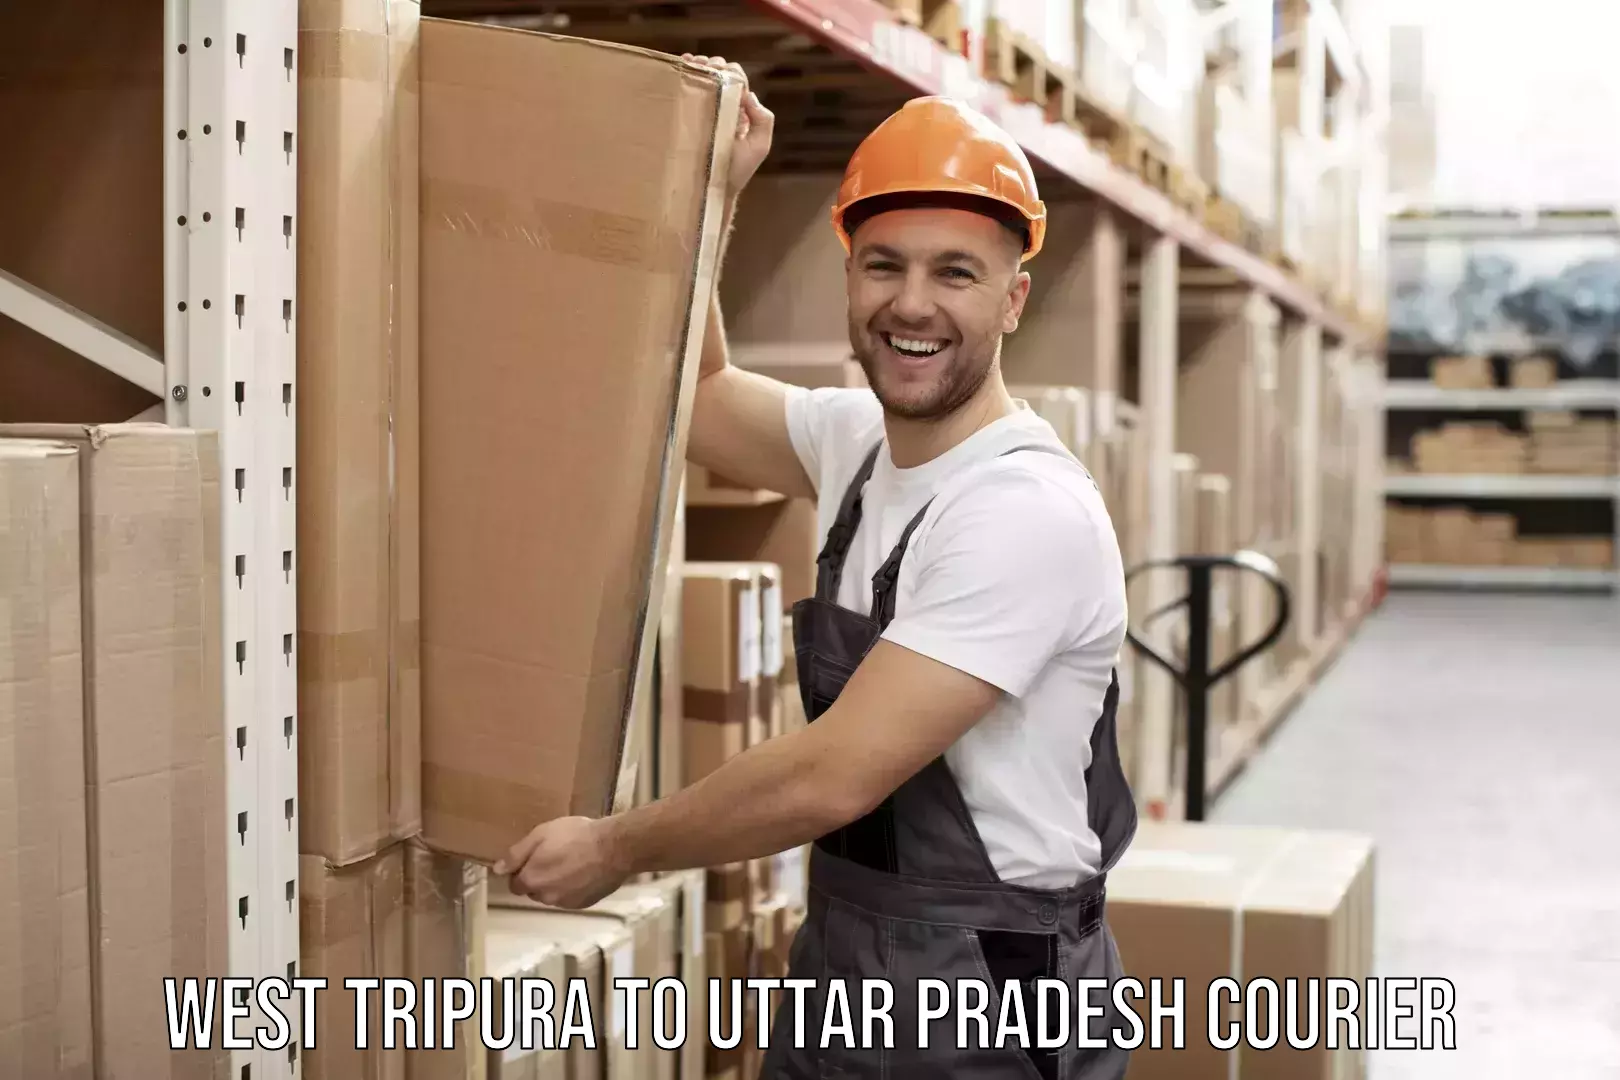 Personalized moving and storage in West Tripura to Jhansi